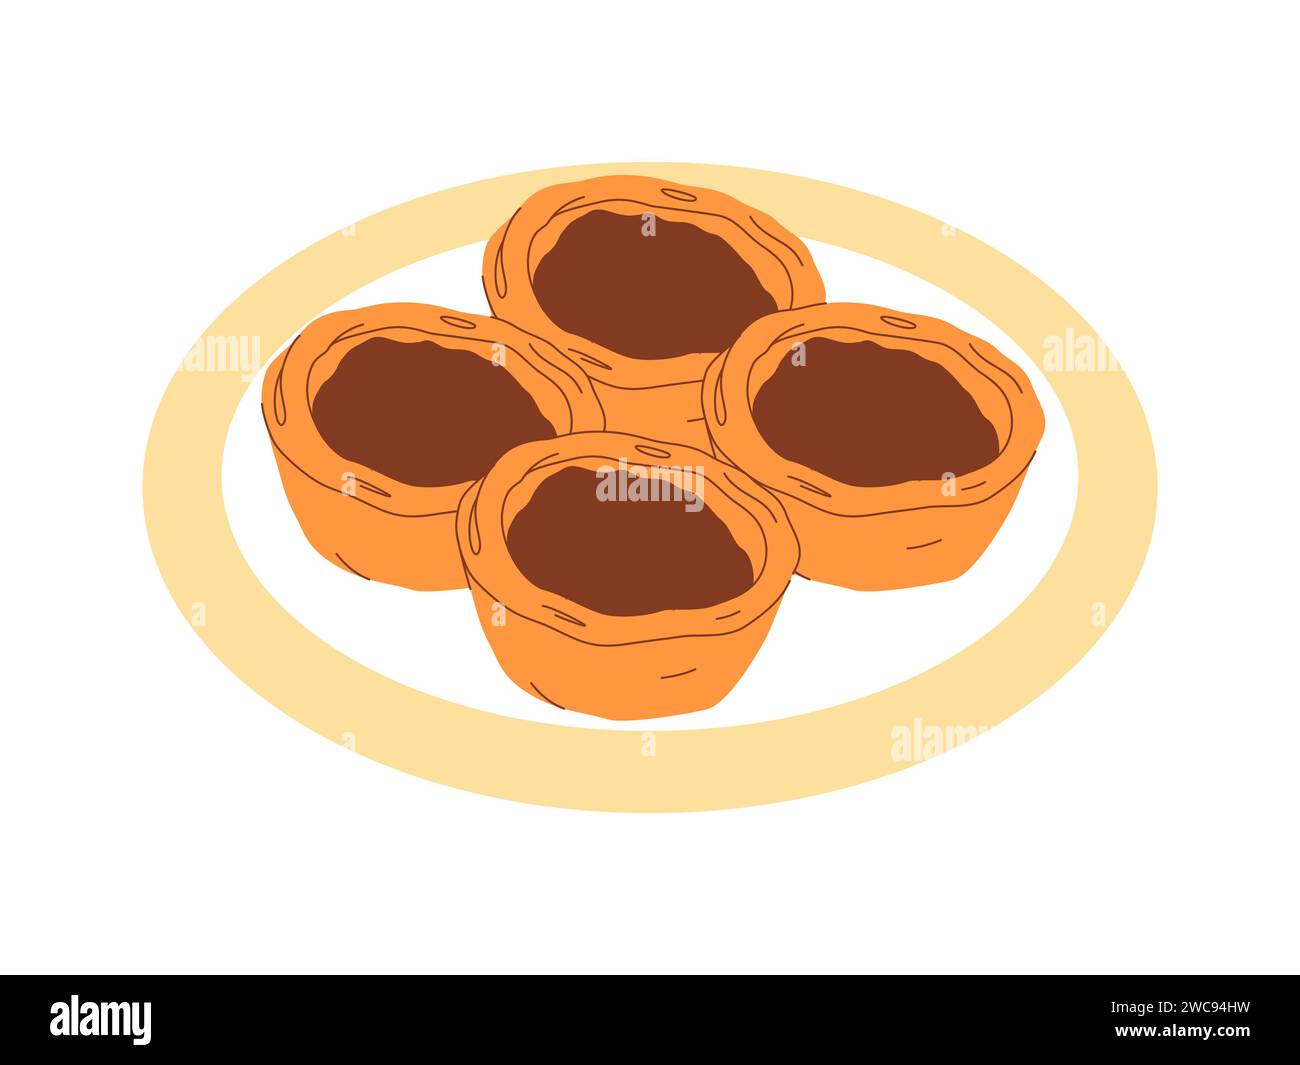 butter tart canada food made from syrup sugar and egg with sweet taste delicious dessert Stock Vector